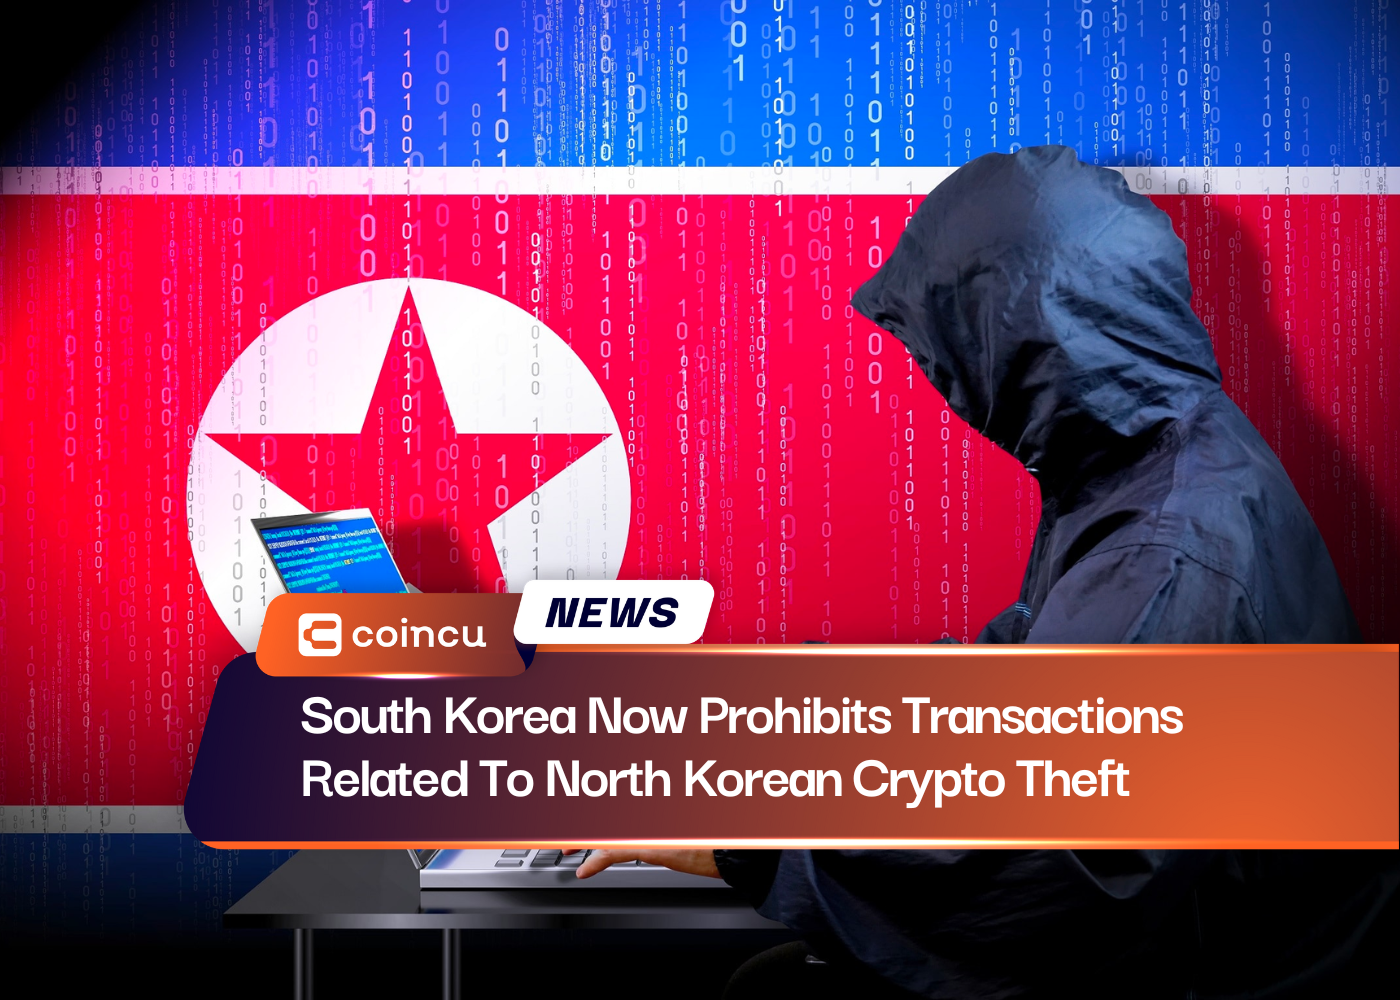 South Korea Now Prohibits Transactions Related To North Korean Crypto Theft